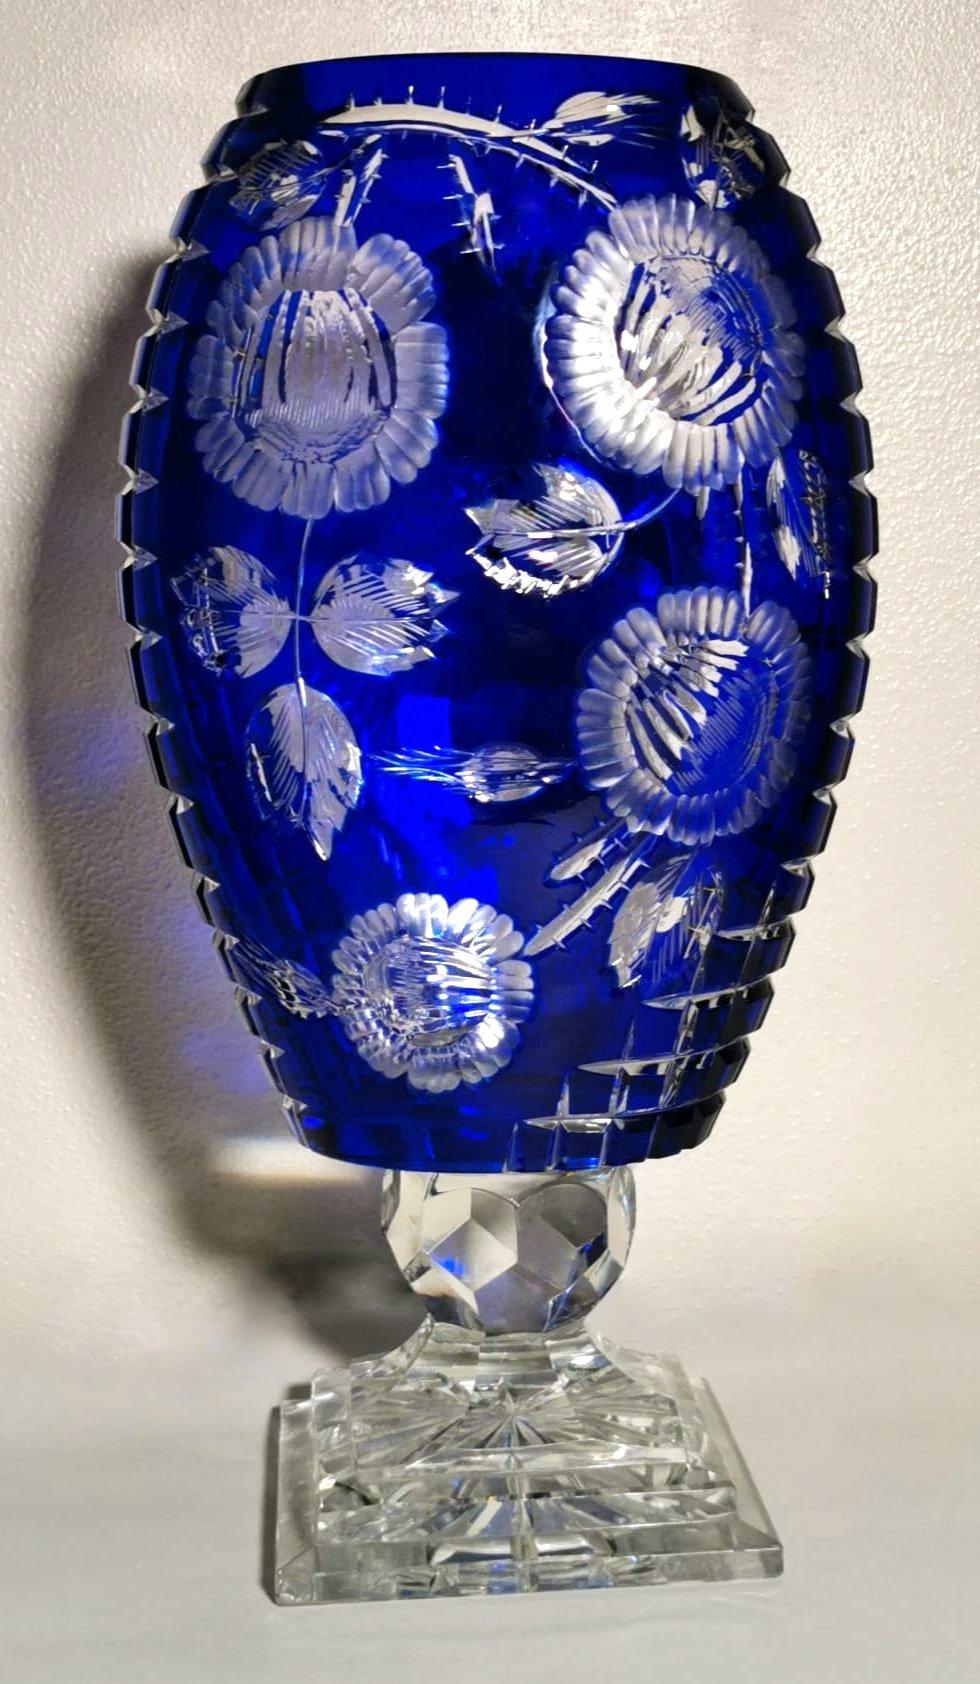 Large and spectacular blue crystal vase; made between 1947 and 1950 in northern Bohemia in the Jablonec nad Nisou area, in one of the many artisan workshops of the place where the processing, blowing, manipulation, carving, and decoration of glass